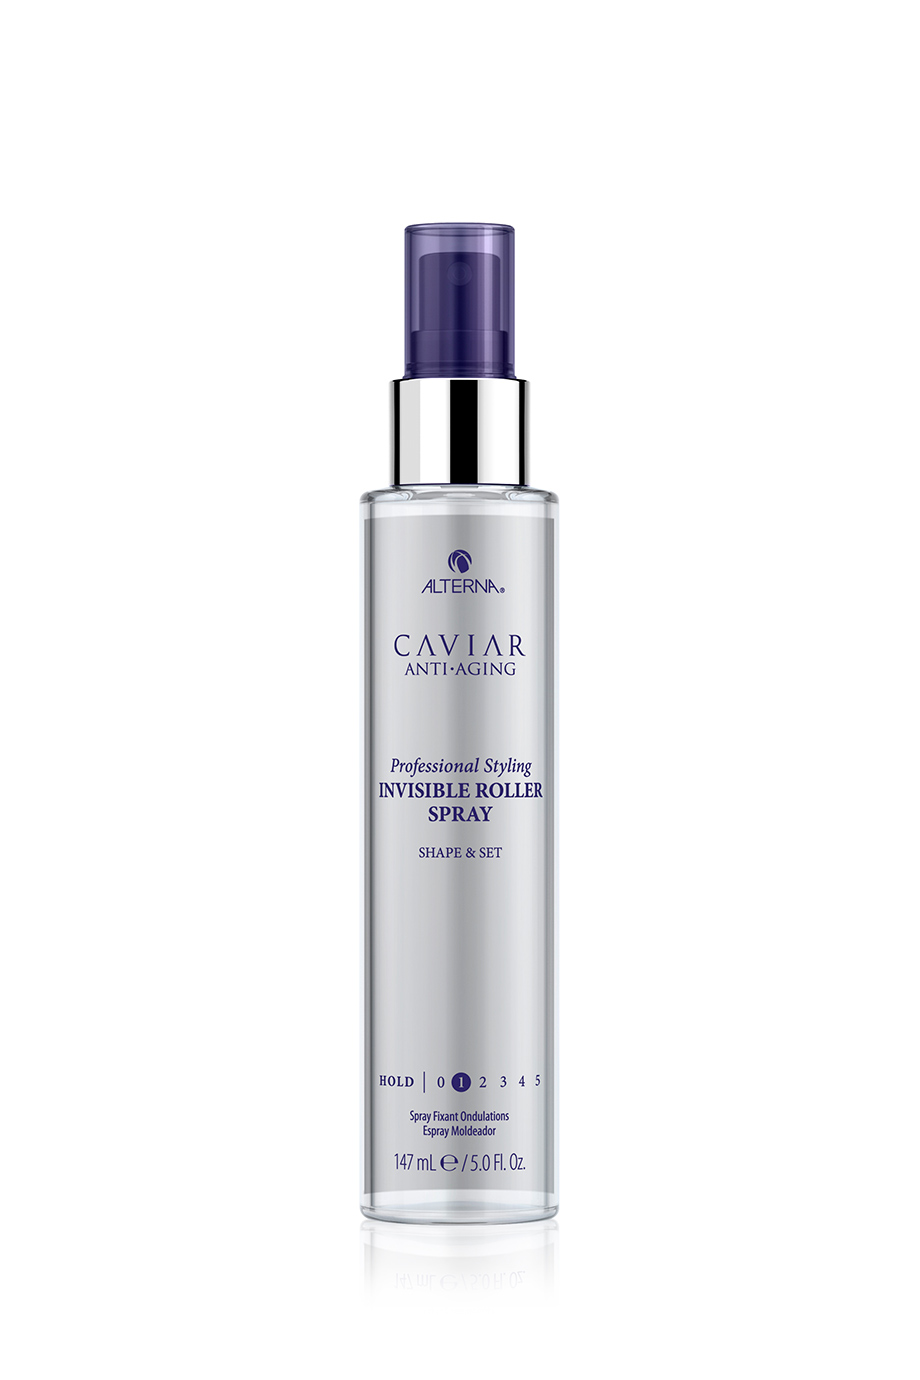 Alterna Caviar Anti-Aging Professional Styling Invisible Roller Spray